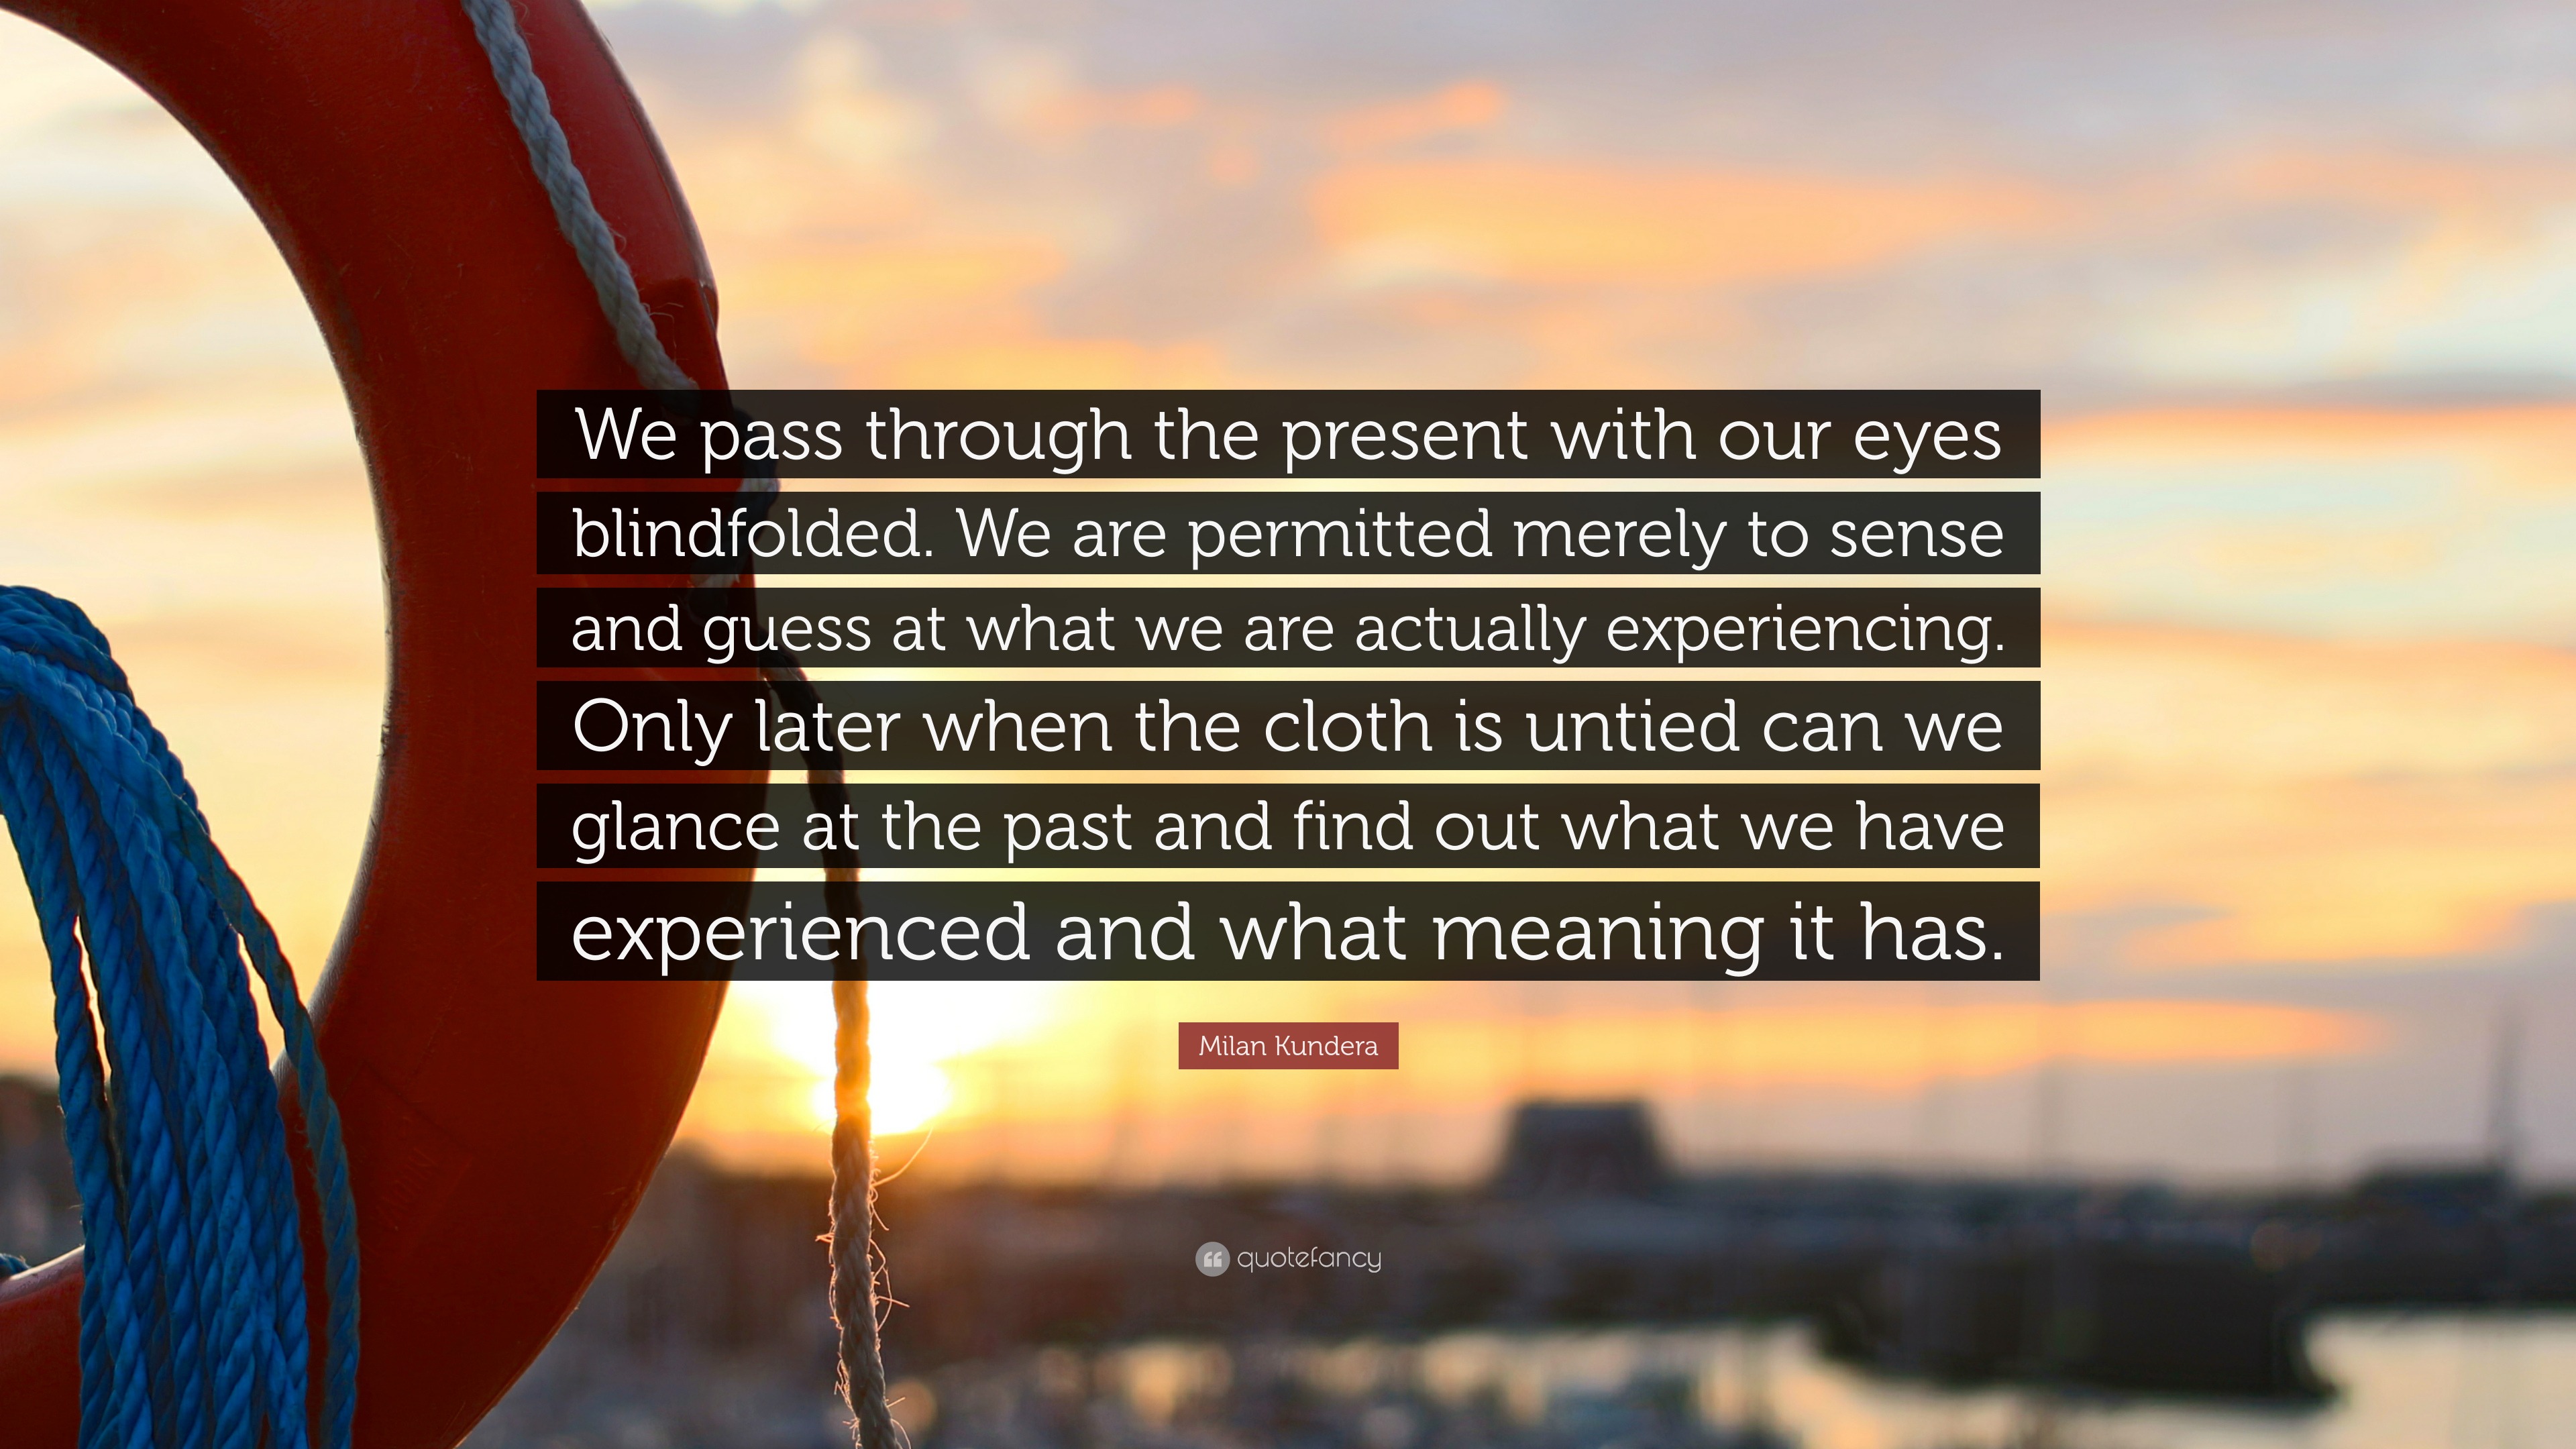 Milan Kundera Quote: “We pass through the present with our eyes blindfolded.  We are permitted merely to sense and guess at what we are actuall”